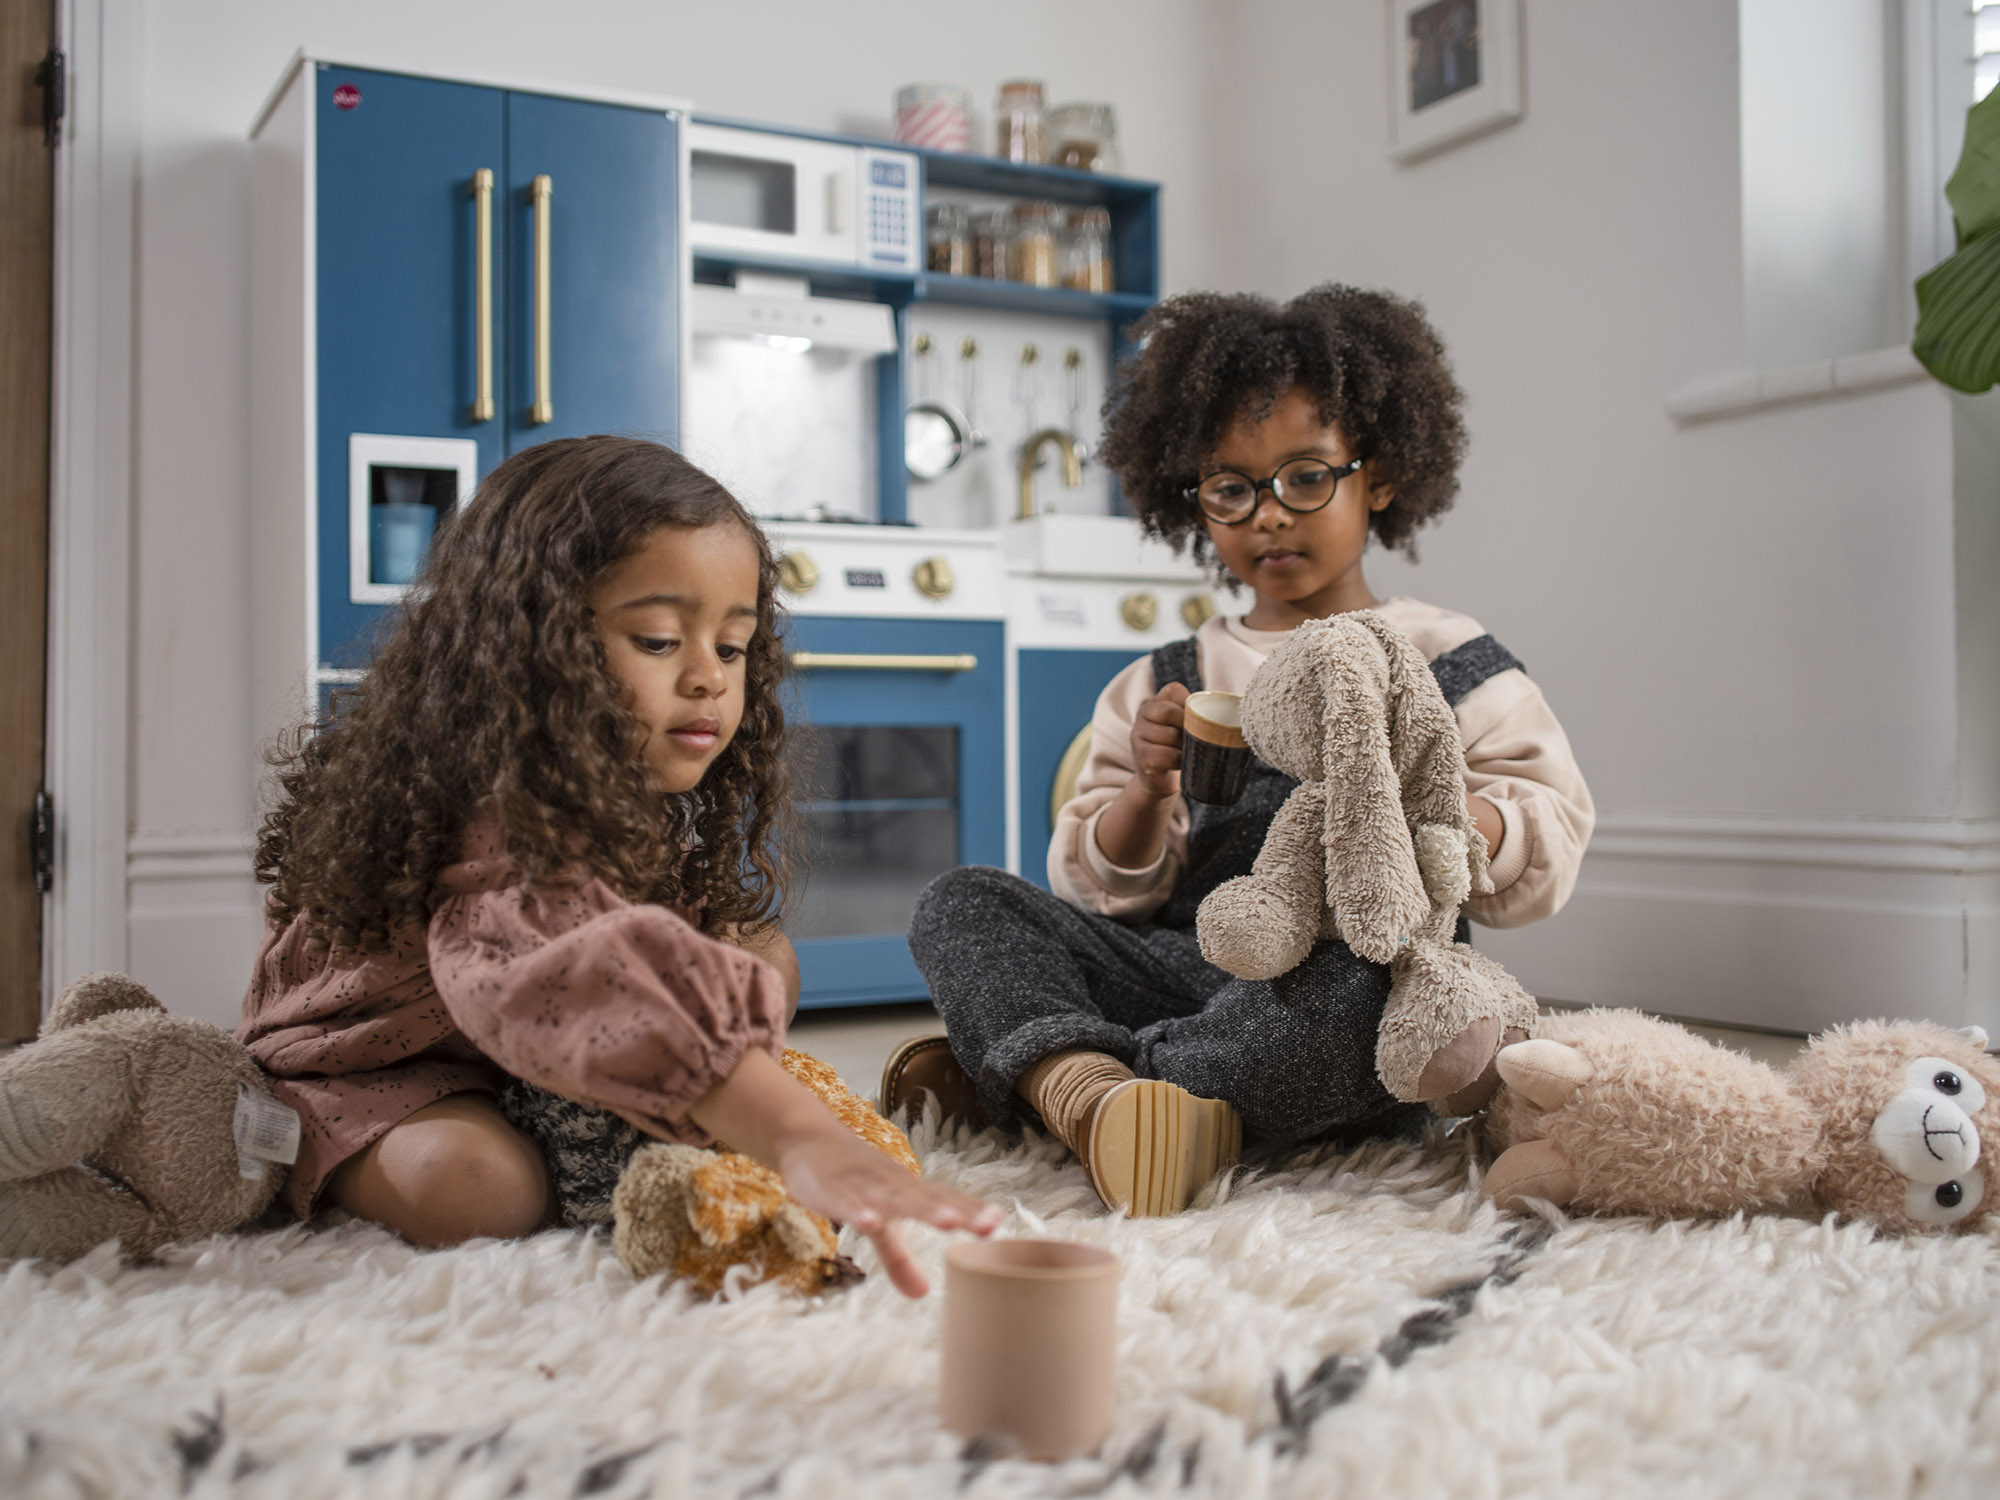 4 types of pretend play—and why they matter